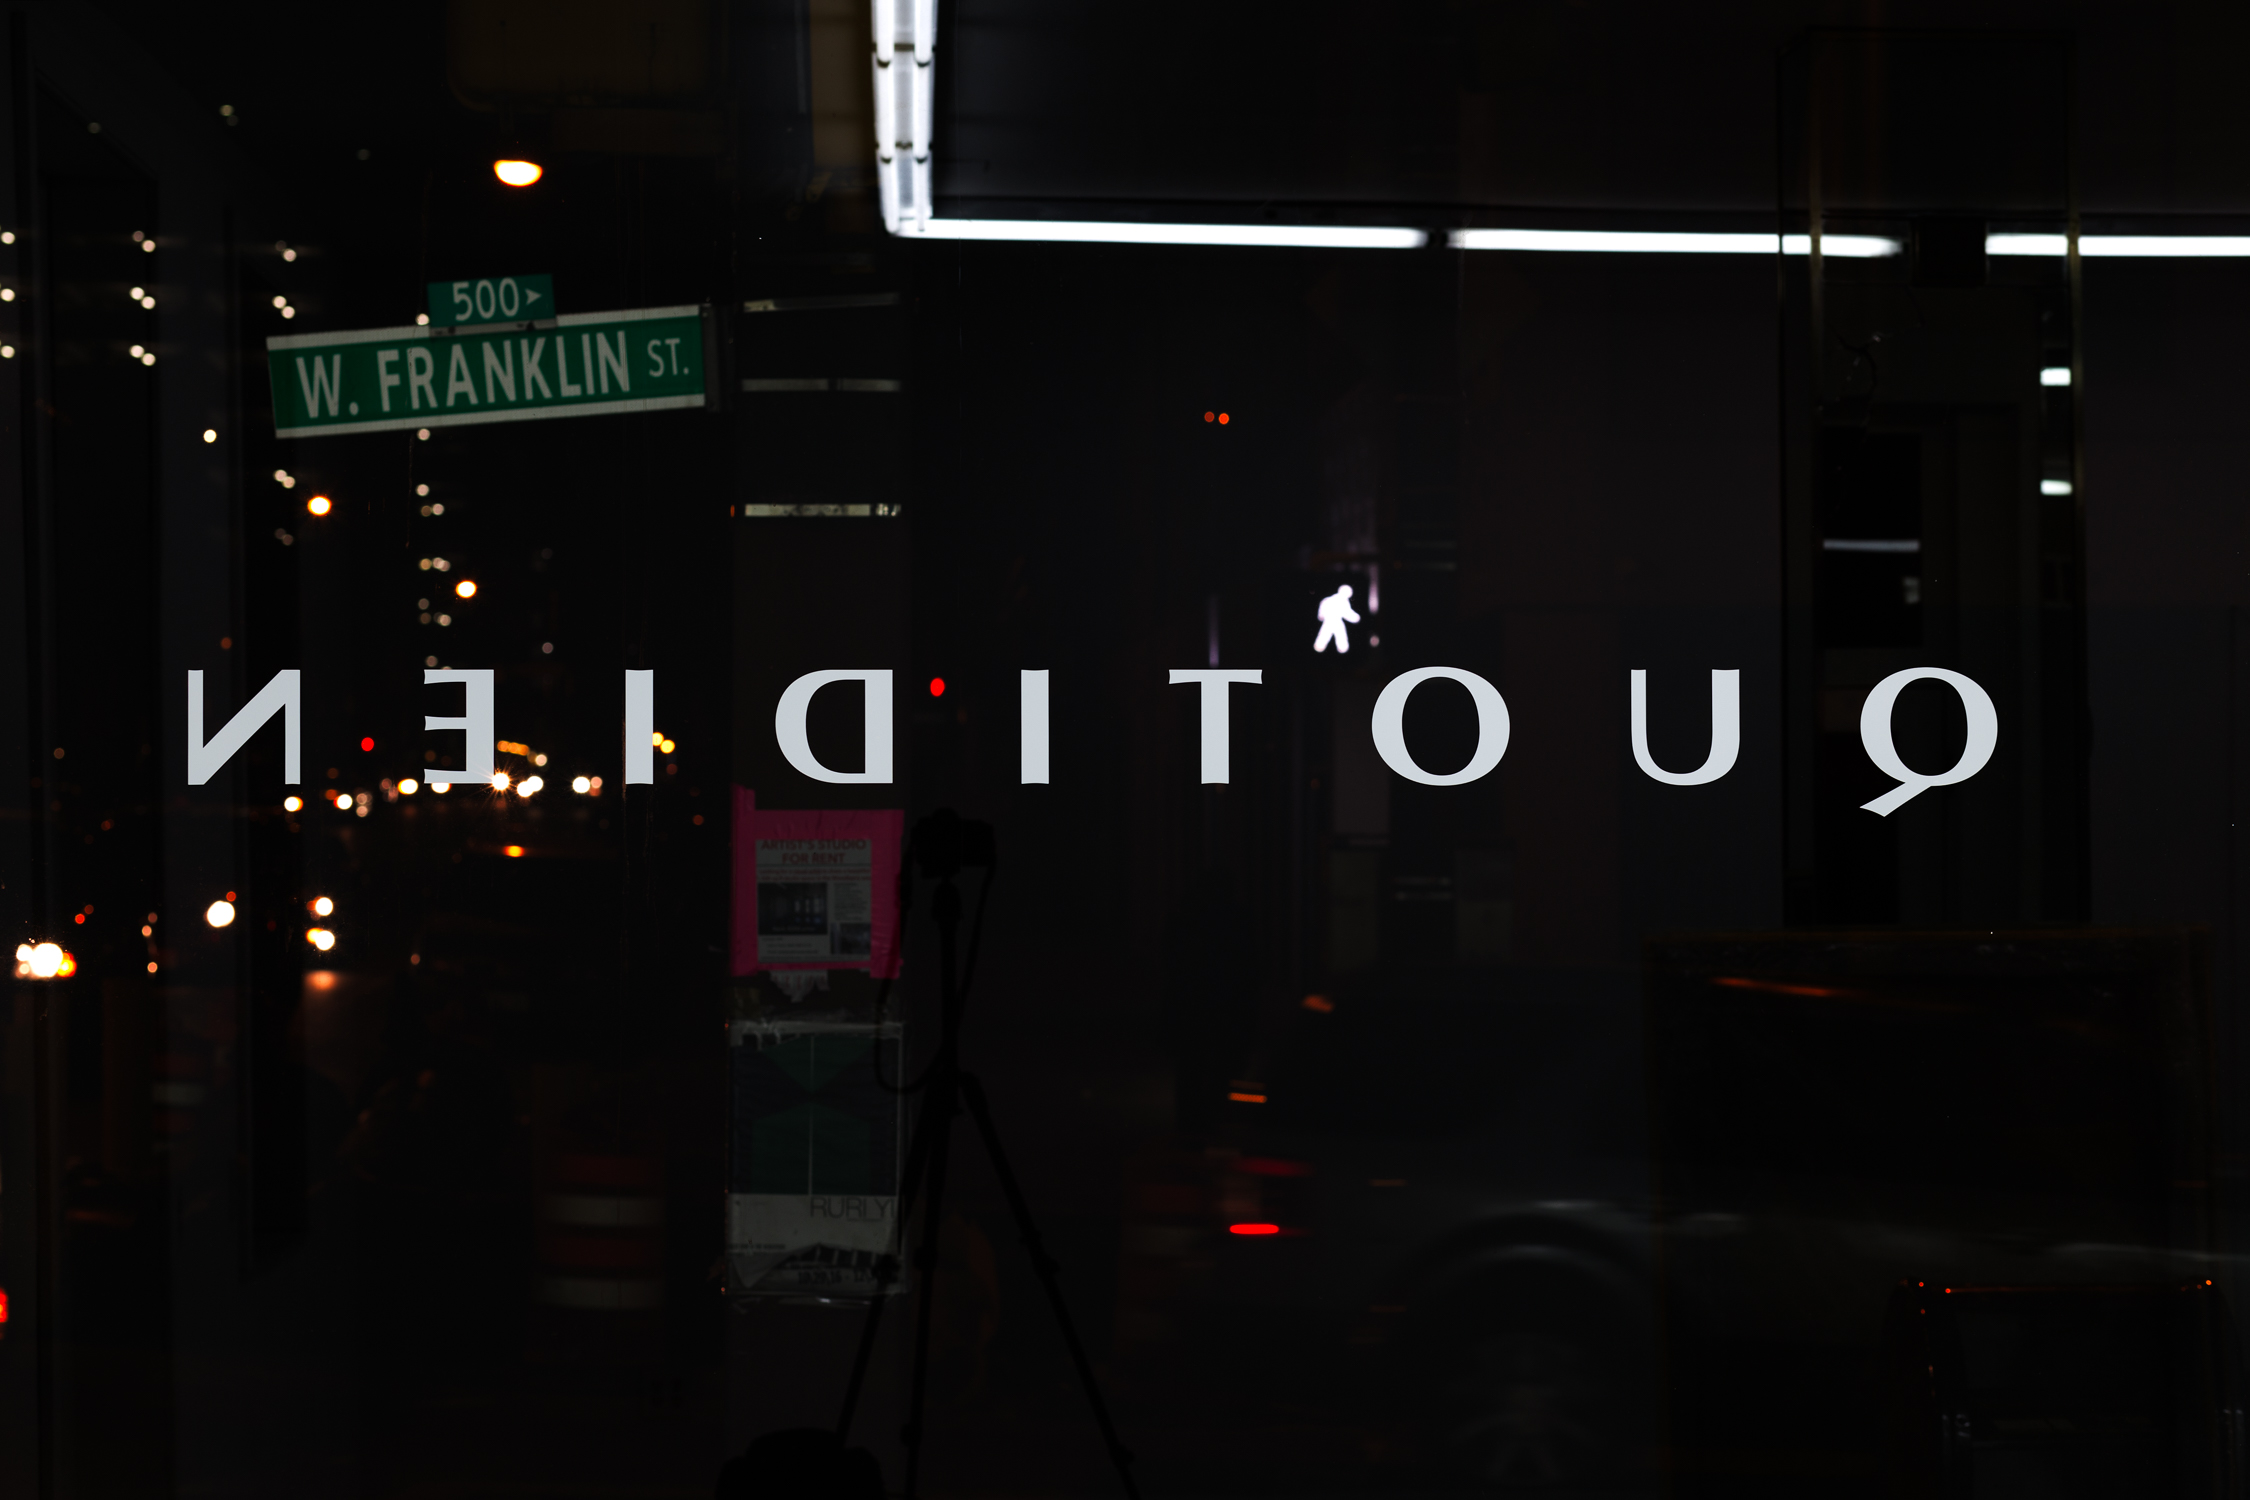 The window decal as viewed from inside the gallery looking out into the night: ‘quotidien’ backwards